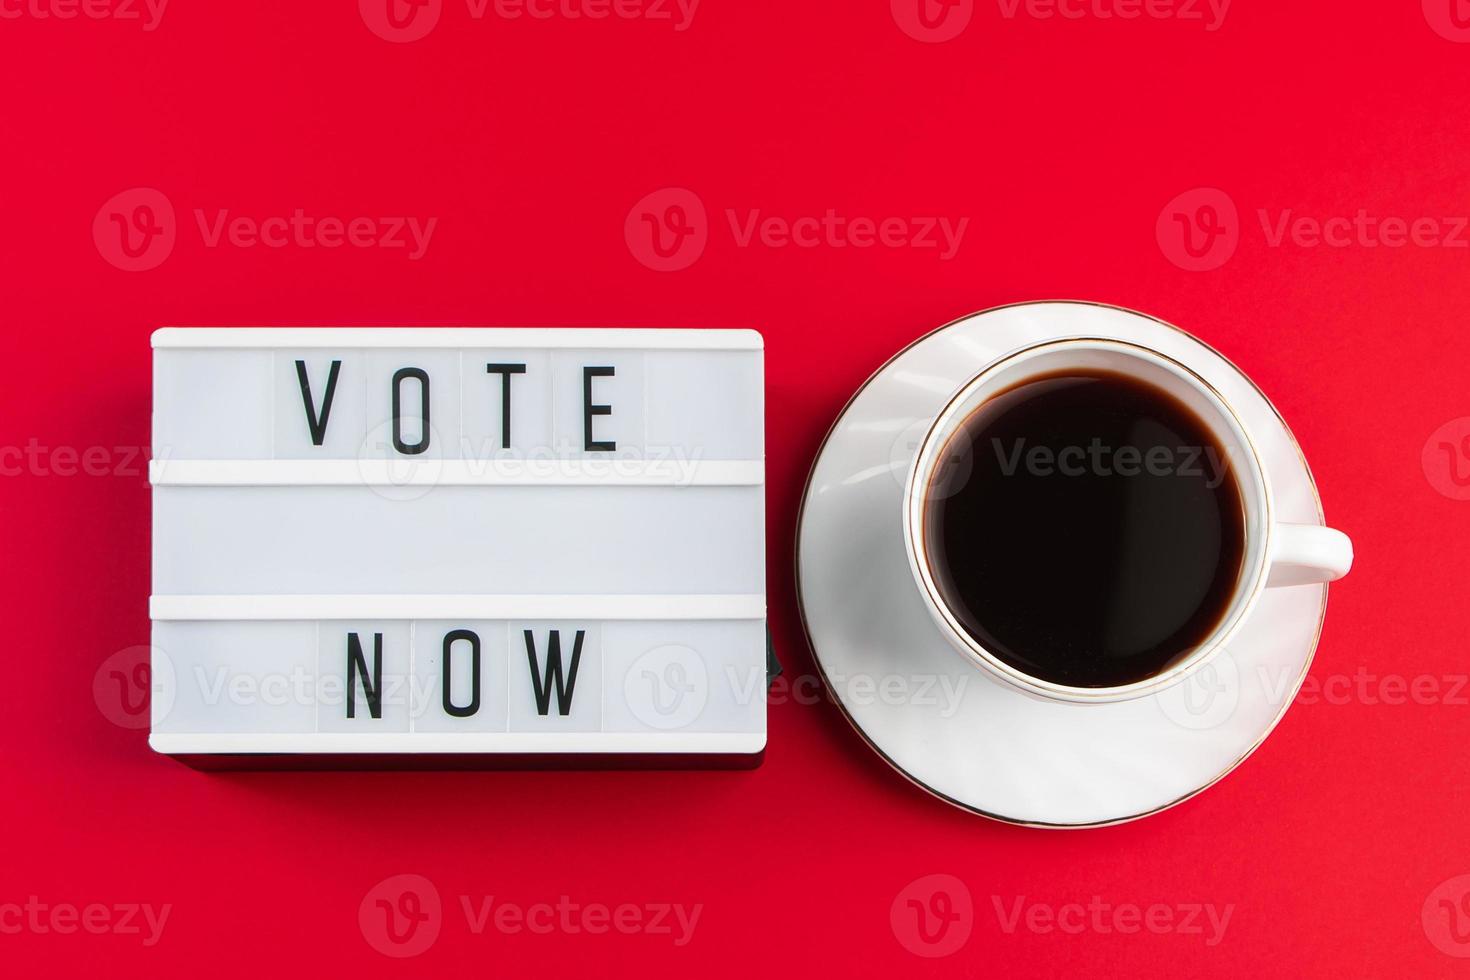 Vote now. Sign and cup of coffee on red background. Election voting concept. photo